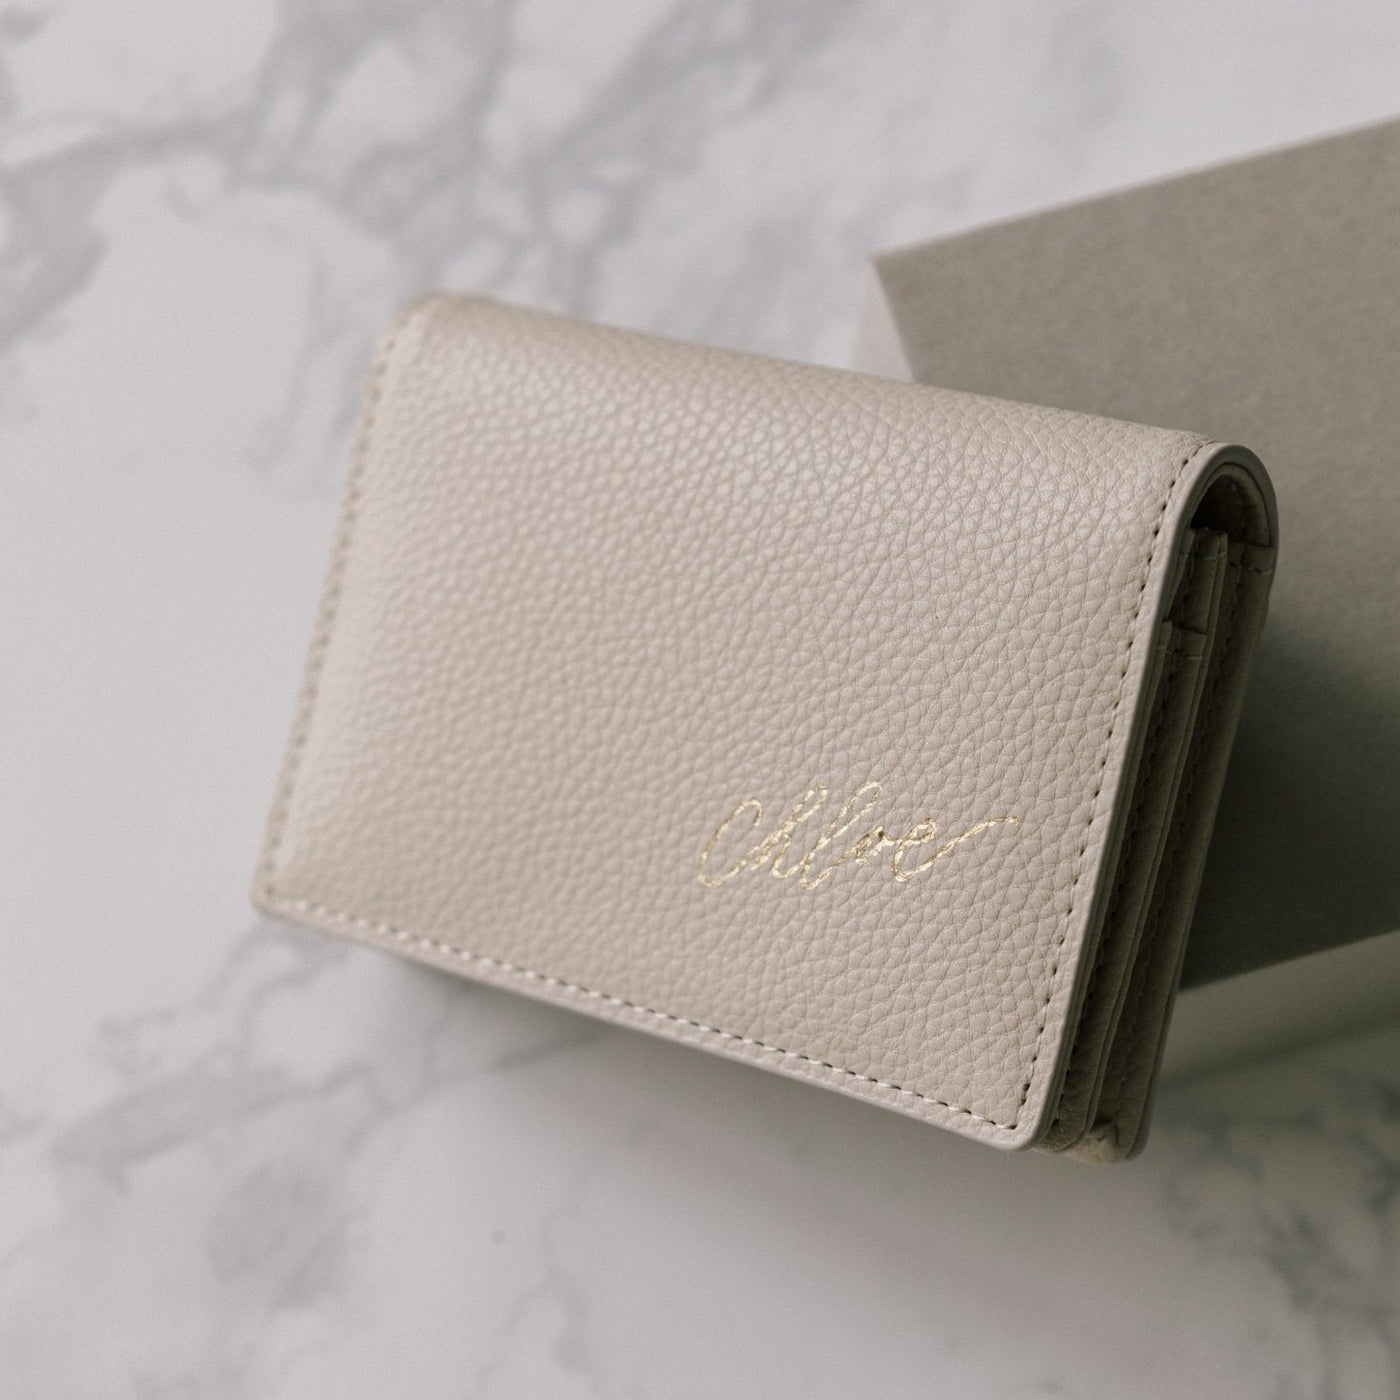 Lark and Ives / Vegan Leather Accessories / Small Accessories / Wallet / Mini Wallet / Card Case / Card Holder / Button snap closure / Fold Wallet / Gold Foil Personalized Light Beige Card Holder